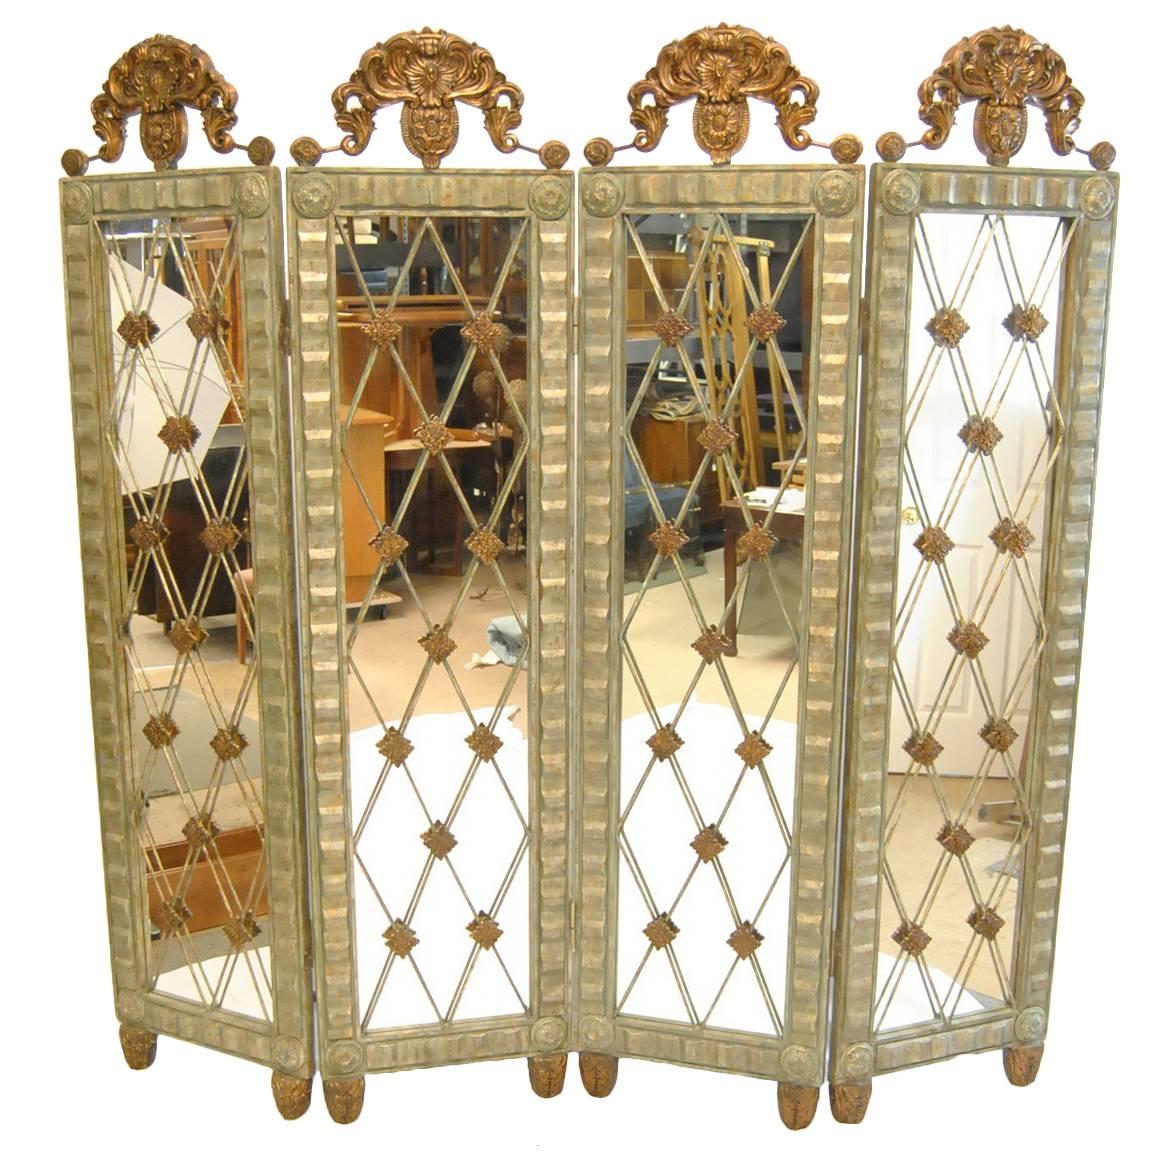 Silver and Copper Four-Part Room Divider Screen by John-Richard